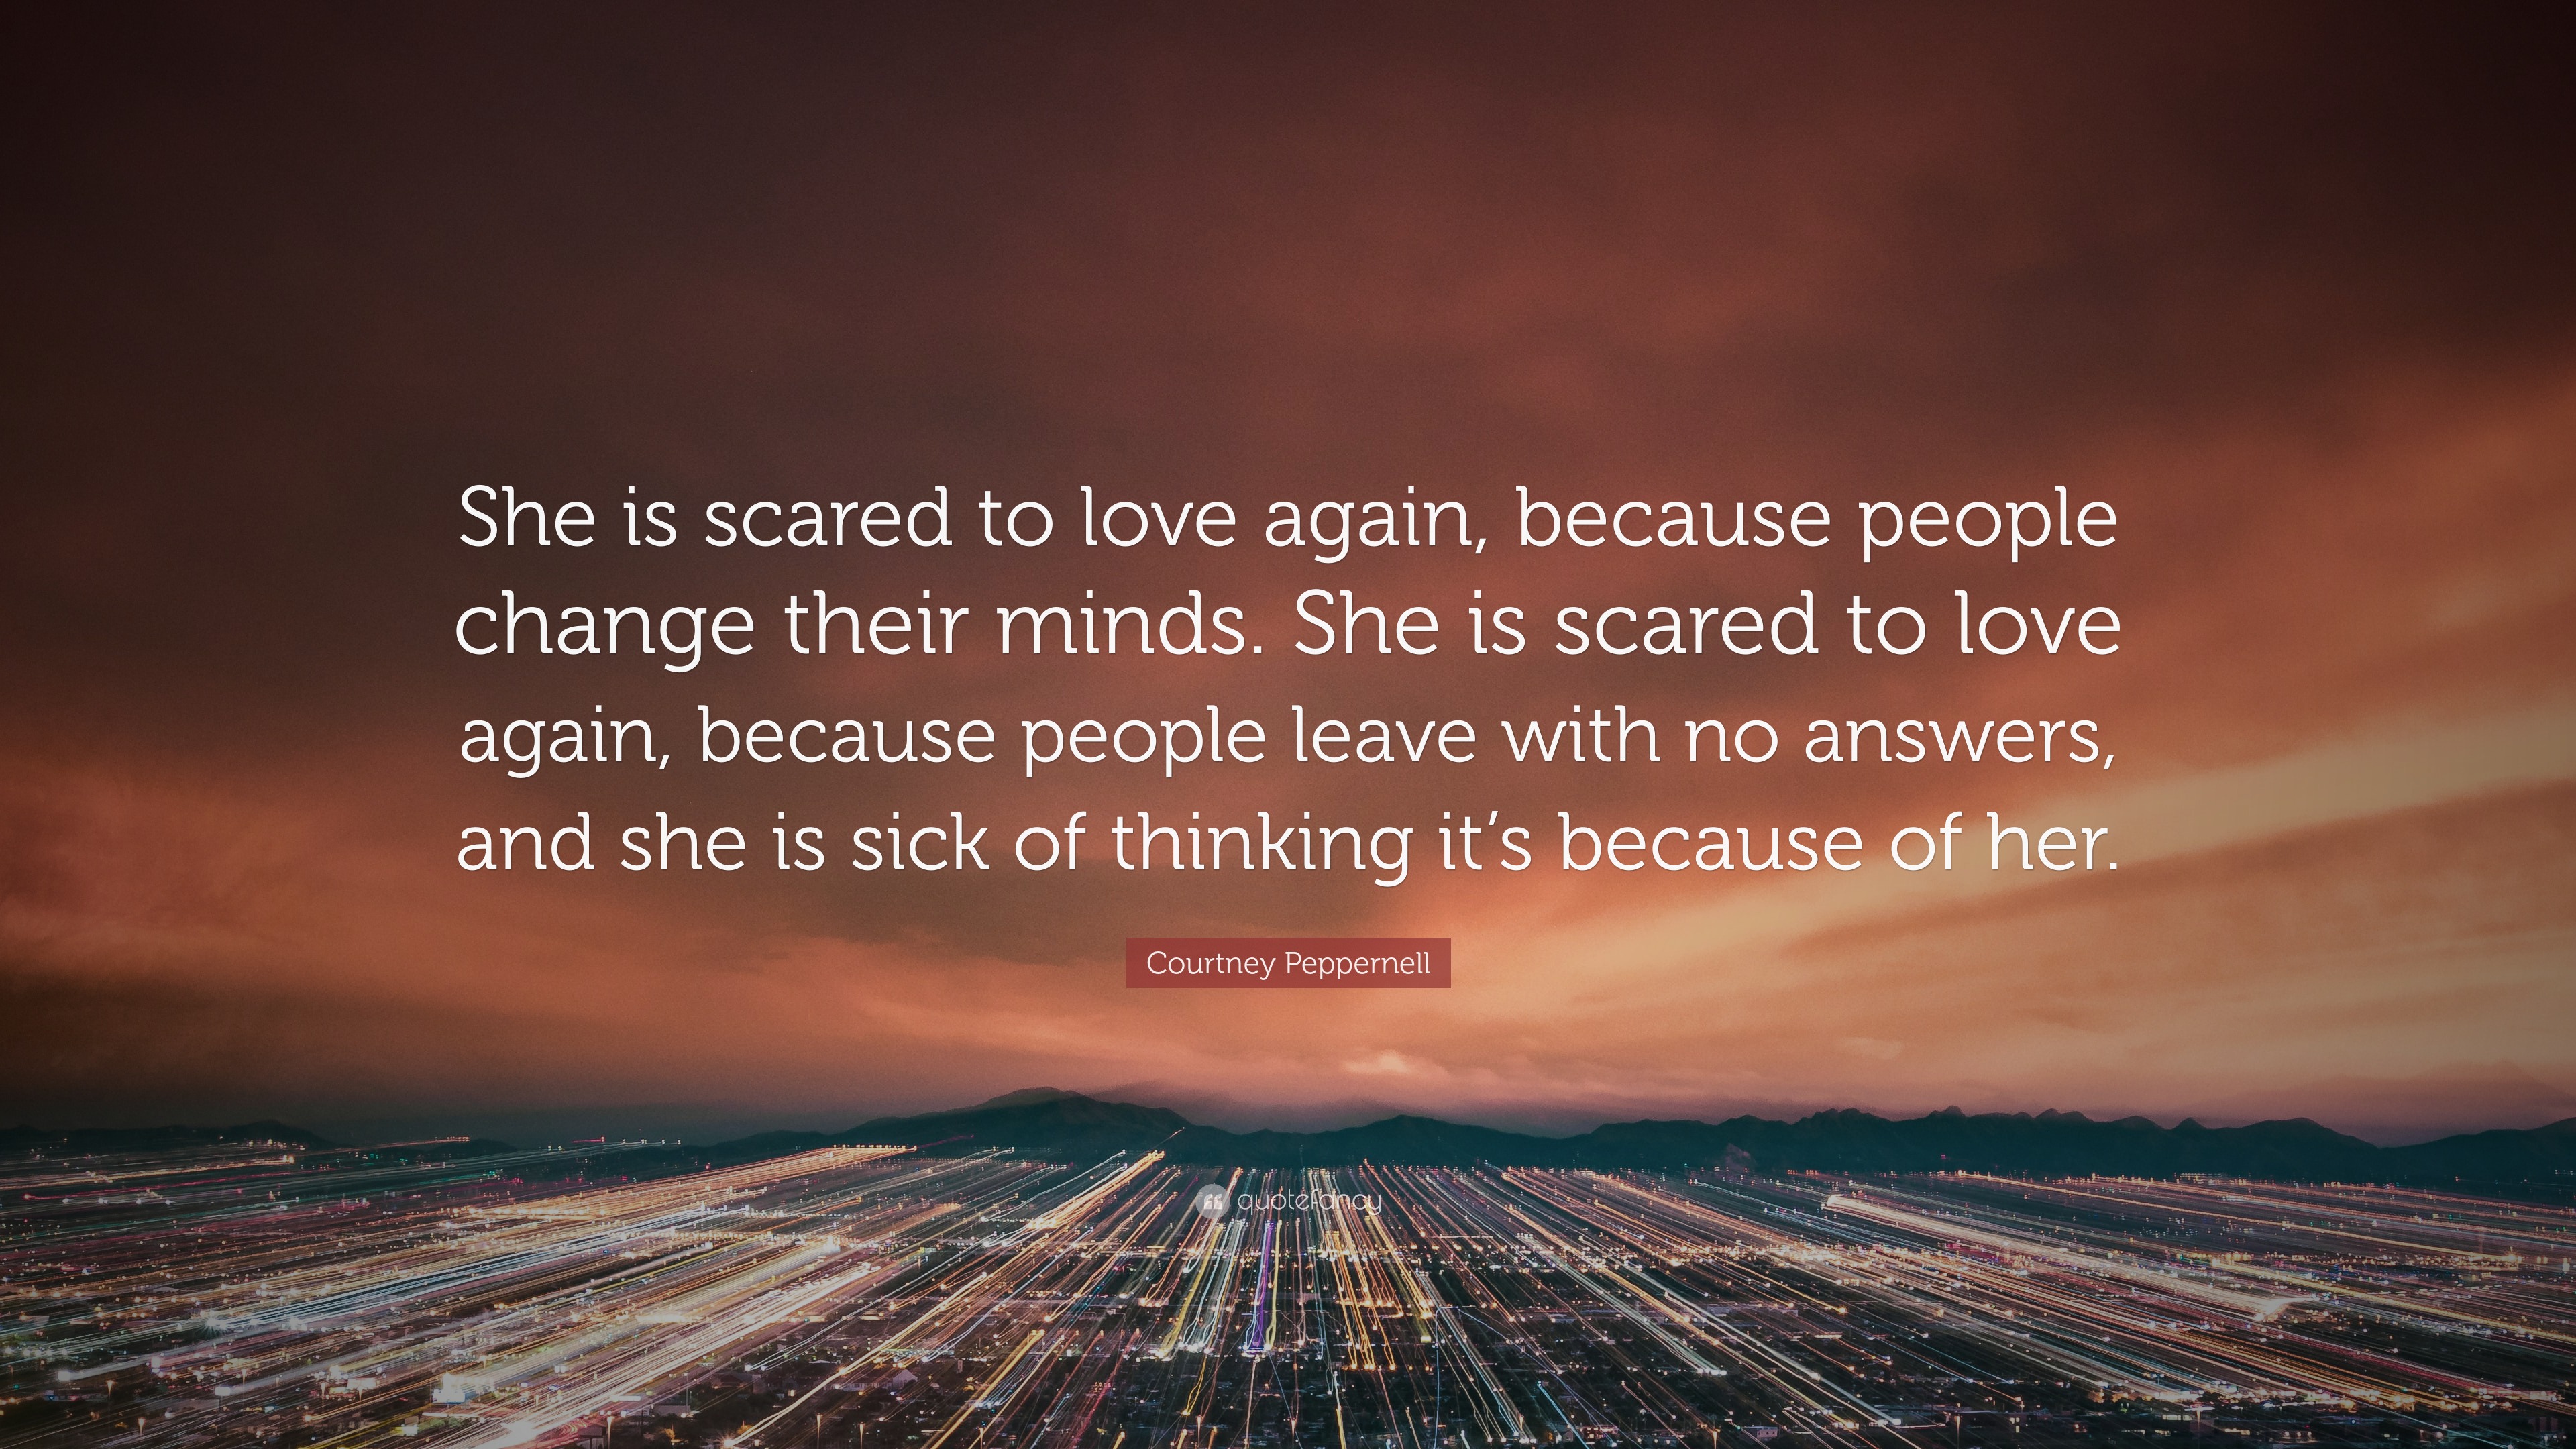 https://quotefancy.com/media/wallpaper/3840x2160/6895851-Courtney-Peppernell-Quote-She-is-scared-to-love-again-because.jpg